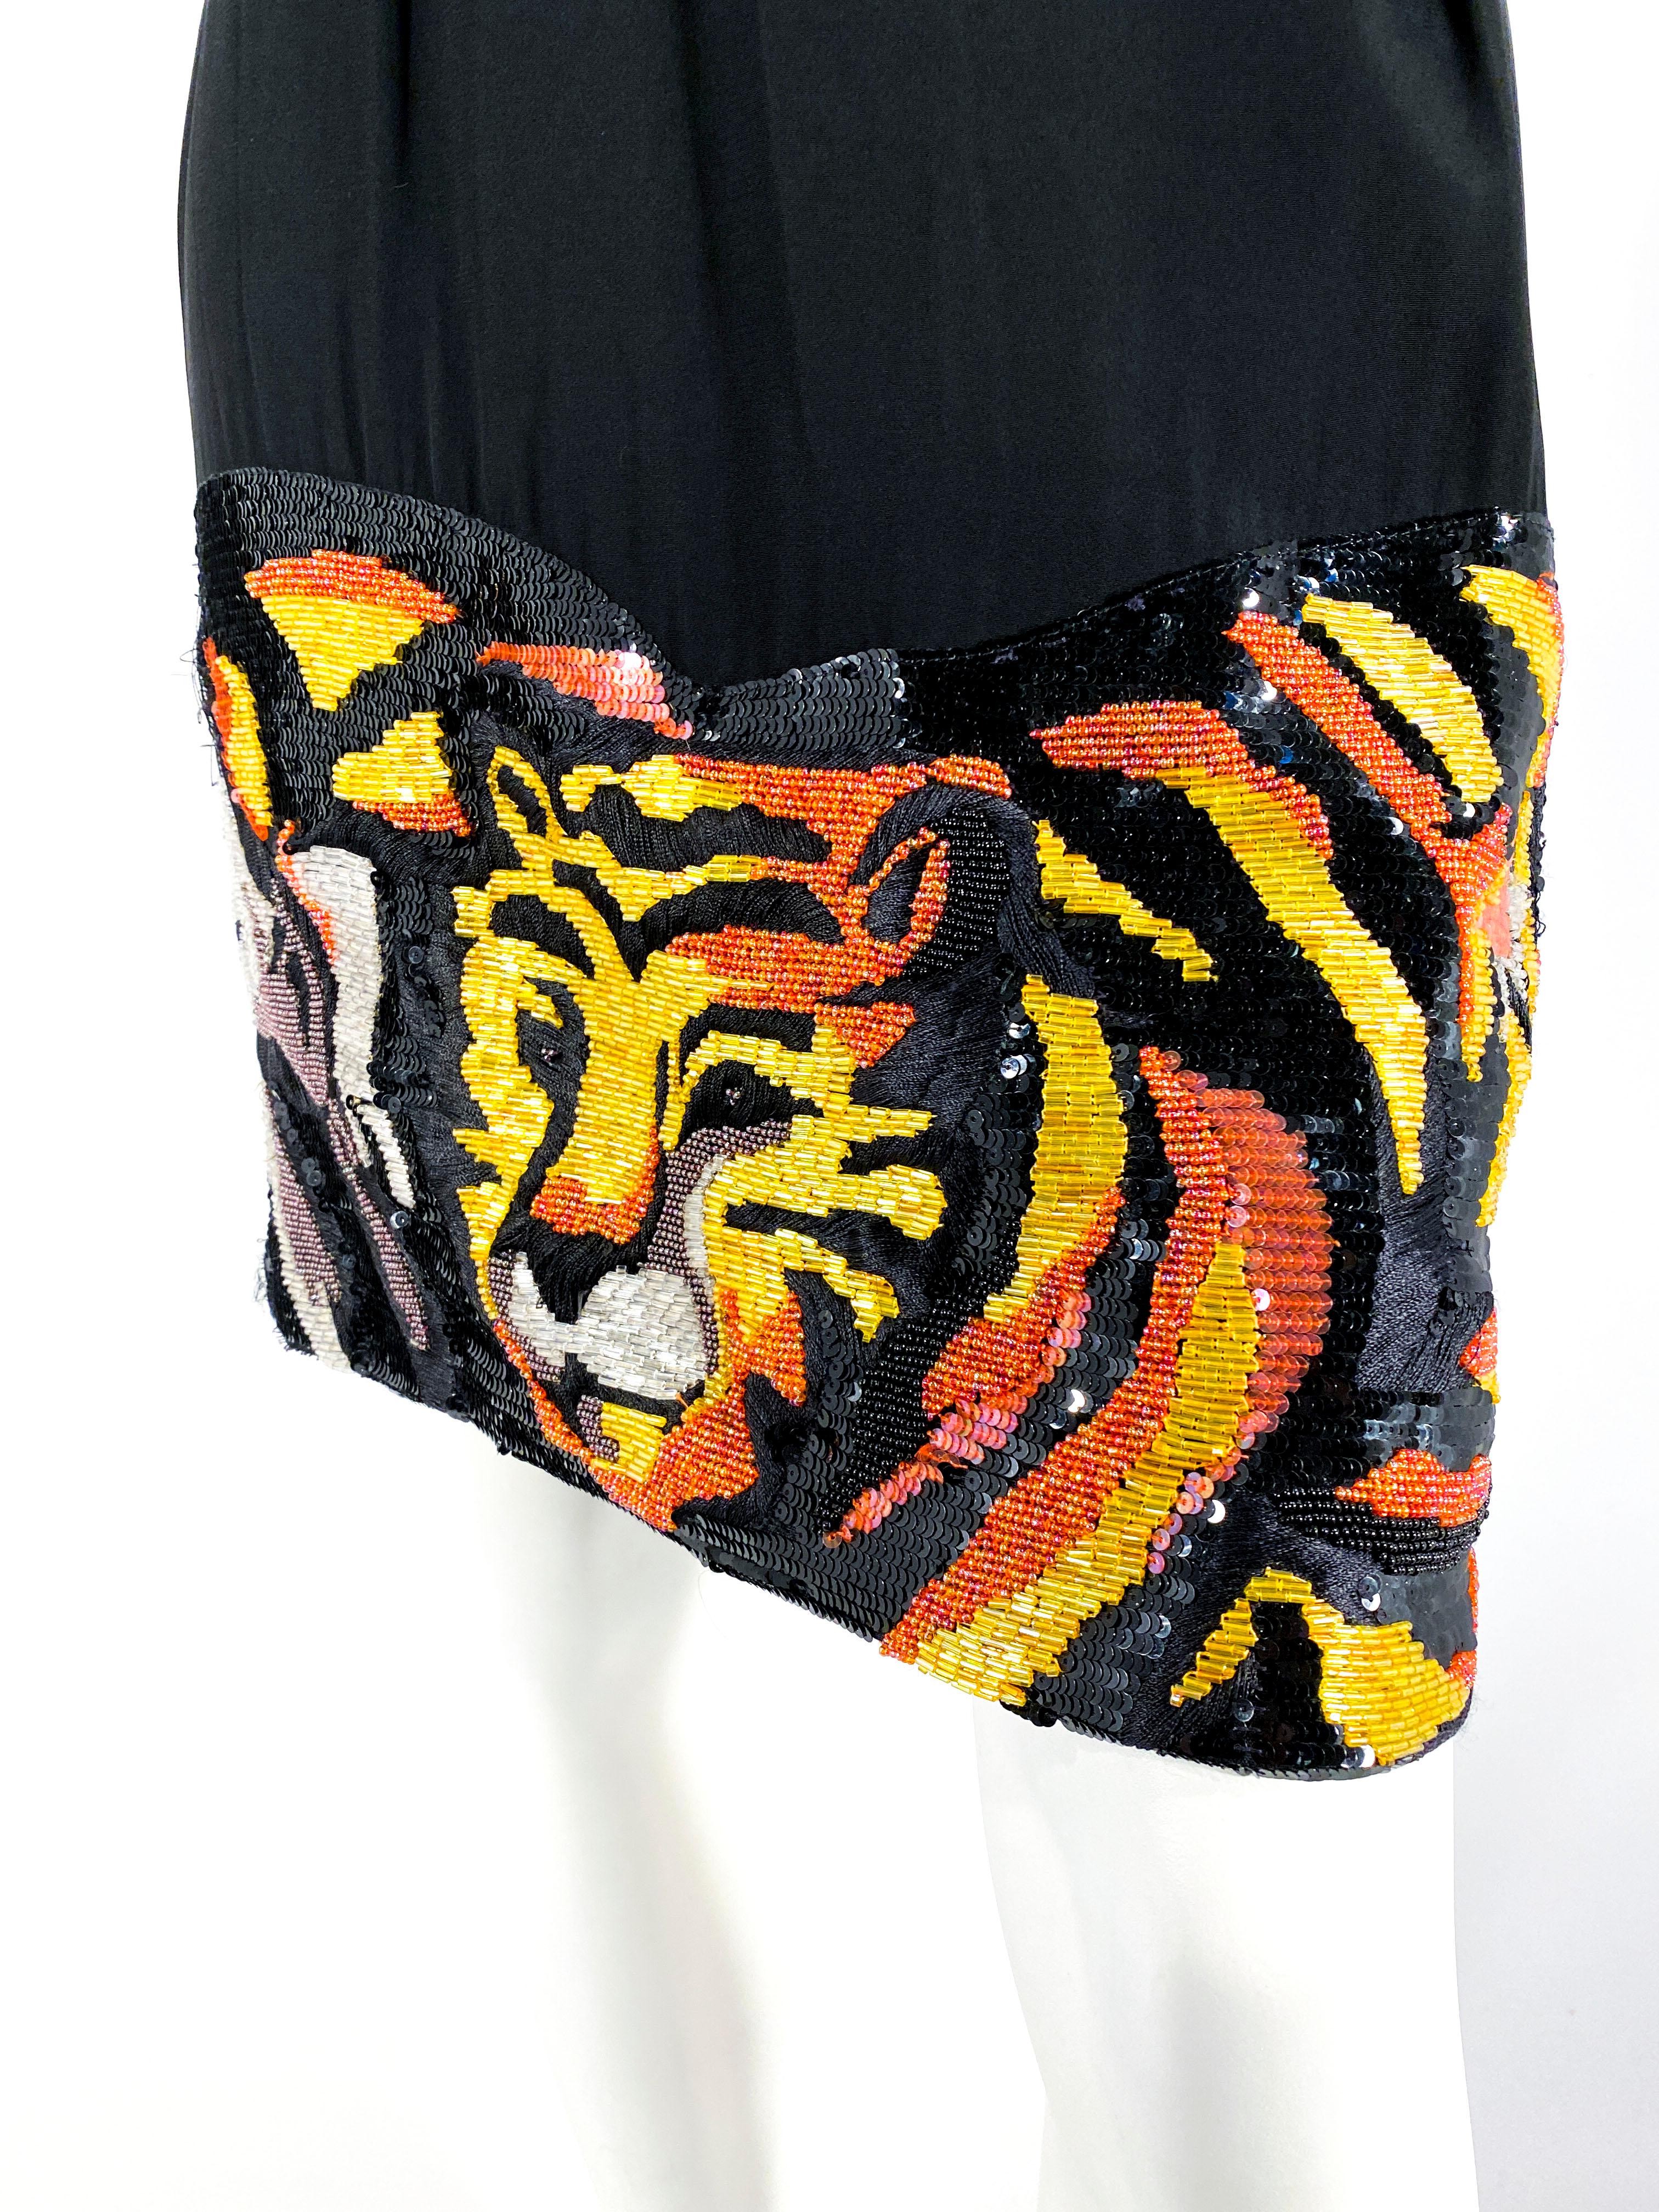 1990s pictorial black silk skreit with heavy beading account for about one-third of the entire skirt. The beads depict a few tigers and a zebra. The hem lays above the knee and the back has a hidden nylon zipper. The waist band is applied and the